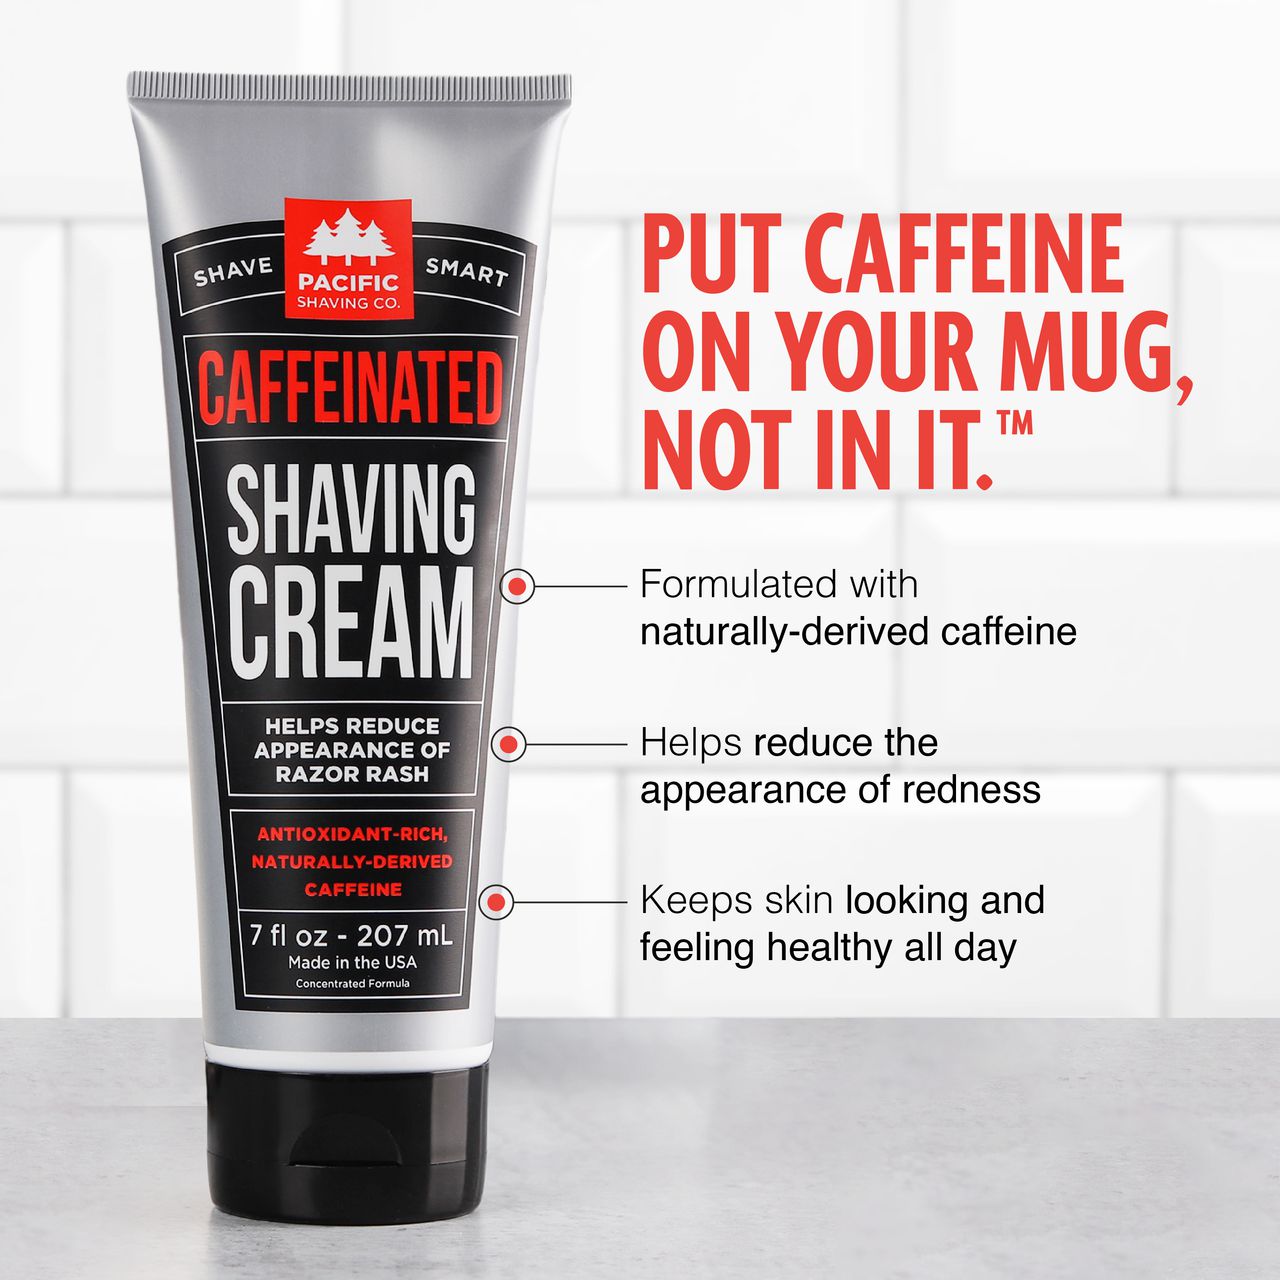 Caffeinated Shaving Cream by Pacific Shaving Company. This outstanding shaving cream utilizes the many benefits of naturally-derived caffeine to help liven up your morning shave routine. It will give you an exceptional shave, help reduce the appearance of redness, and keep your skin looking and feeling healthy all day. It may not replace your morning coffee, but it will give a little extra kick to your morning routine. A little goes a long way.